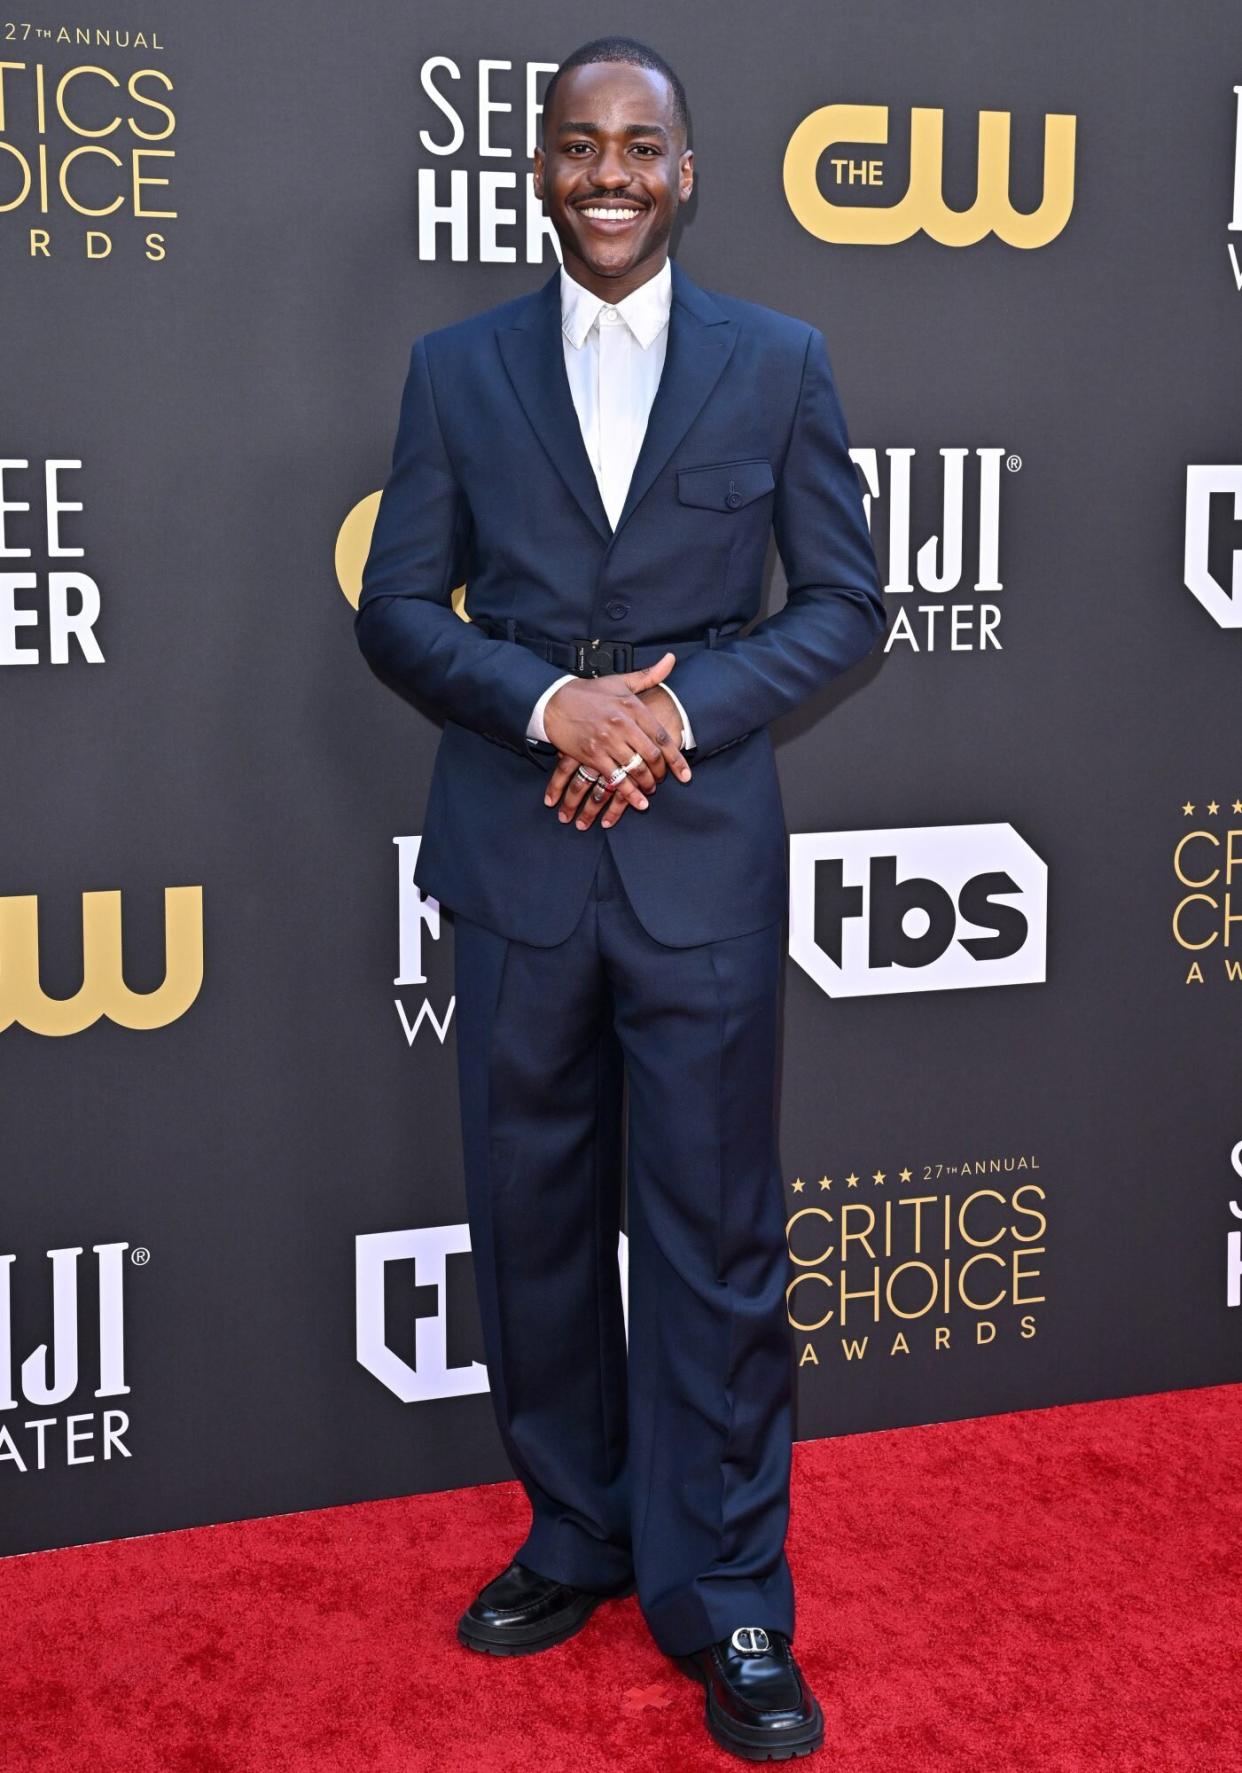 LOS ANGELES, CALIFORNIA - MARCH 13: Ncuti Gatwa attends the 27th Annual Critics Choice Awards at Fairmont Century Plaza on March 13, 2022 in Los Angeles, California. (Photo by Axelle/Bauer-Griffin/FilmMagic)